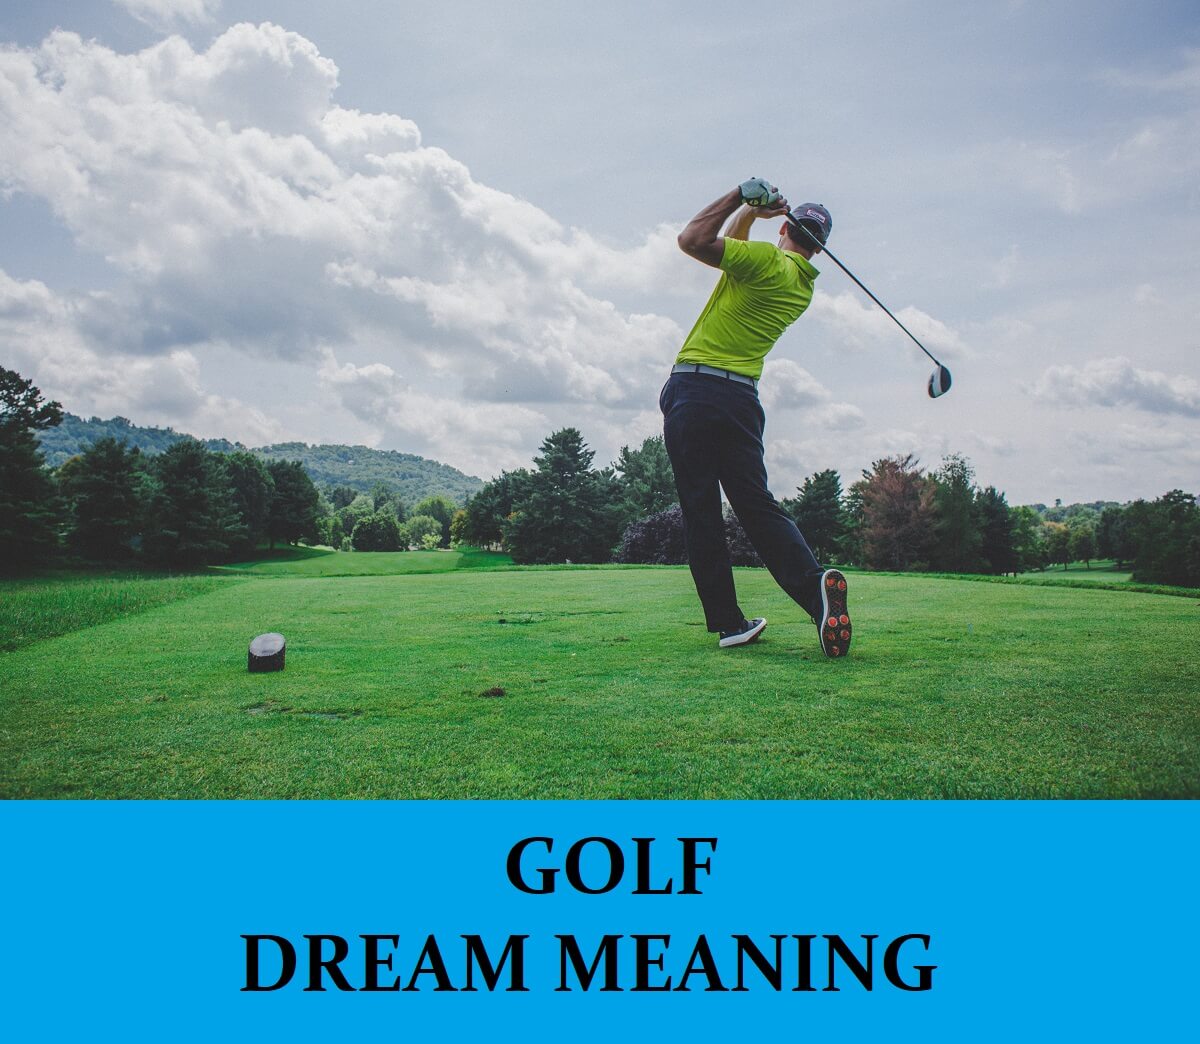 Dream About Golf